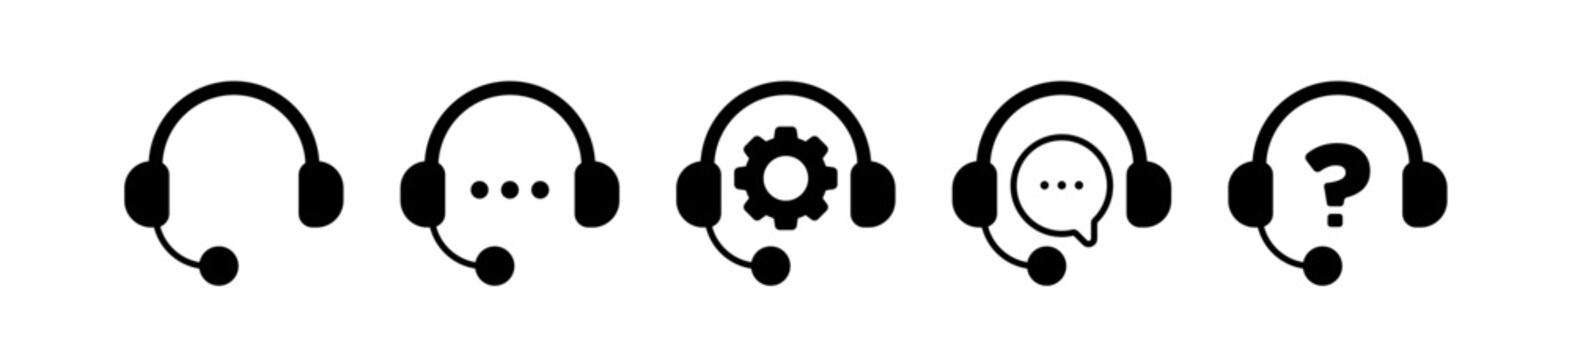 Customer support service icons set. Online support service with headphones and microphone. Call center icon. Chat speech bubble.  Vector illustration